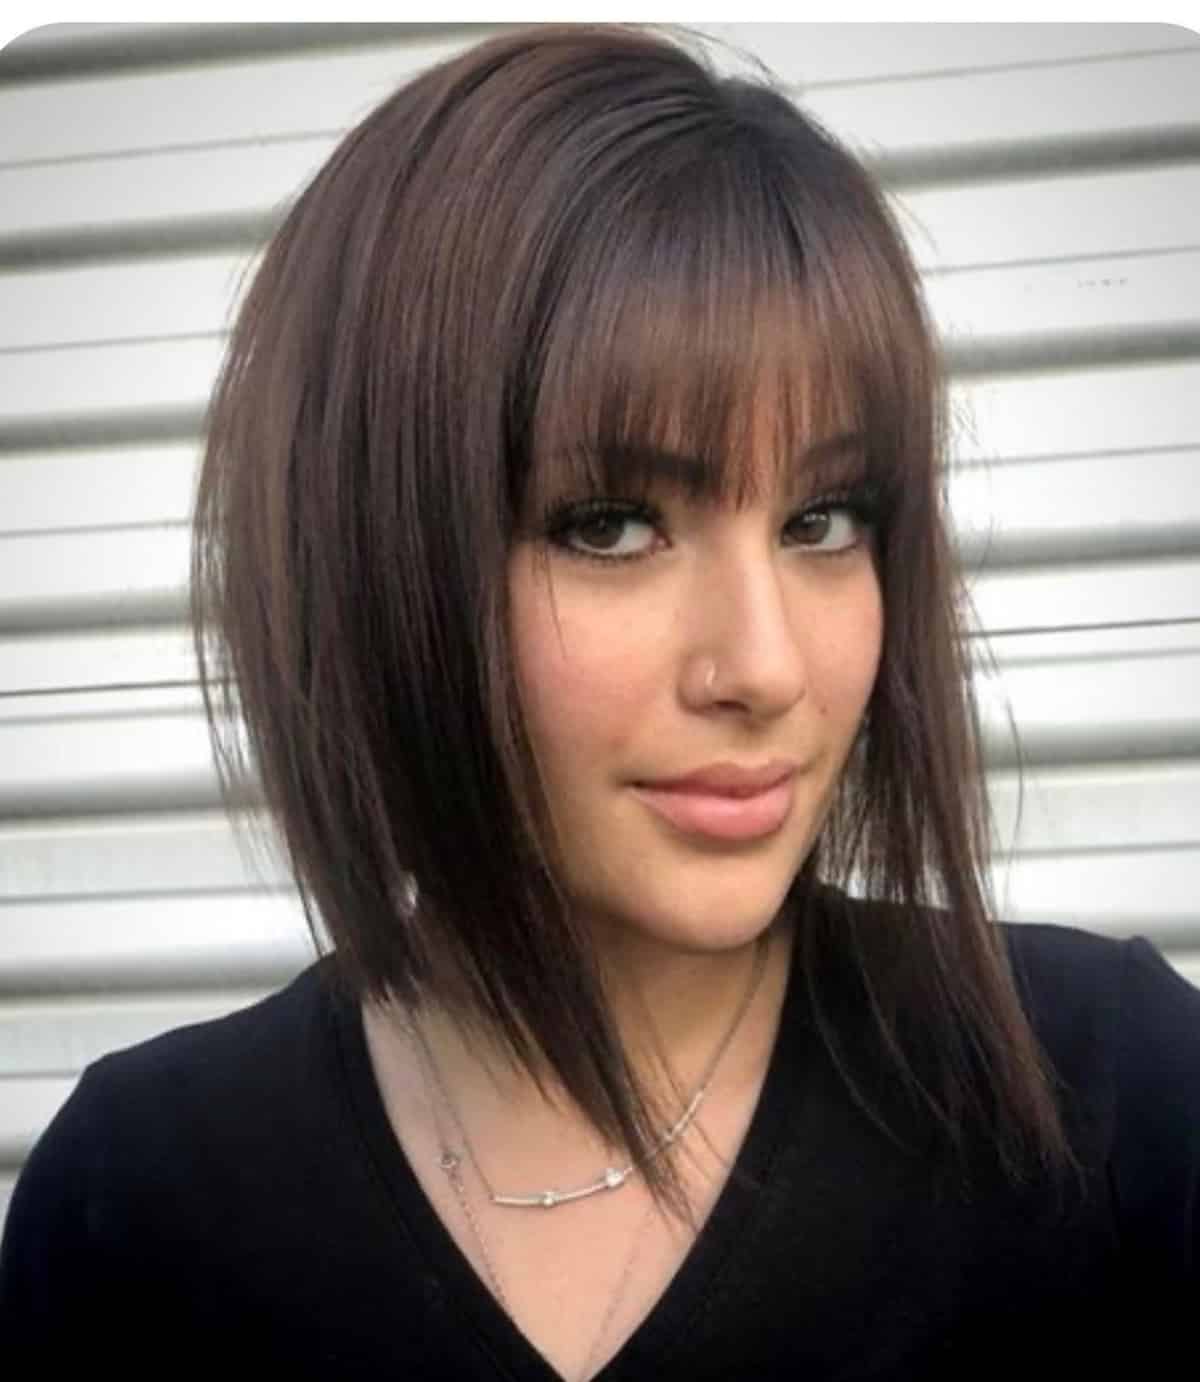 20 Modern Inverted Bob Haircuts & Ones to Avoid